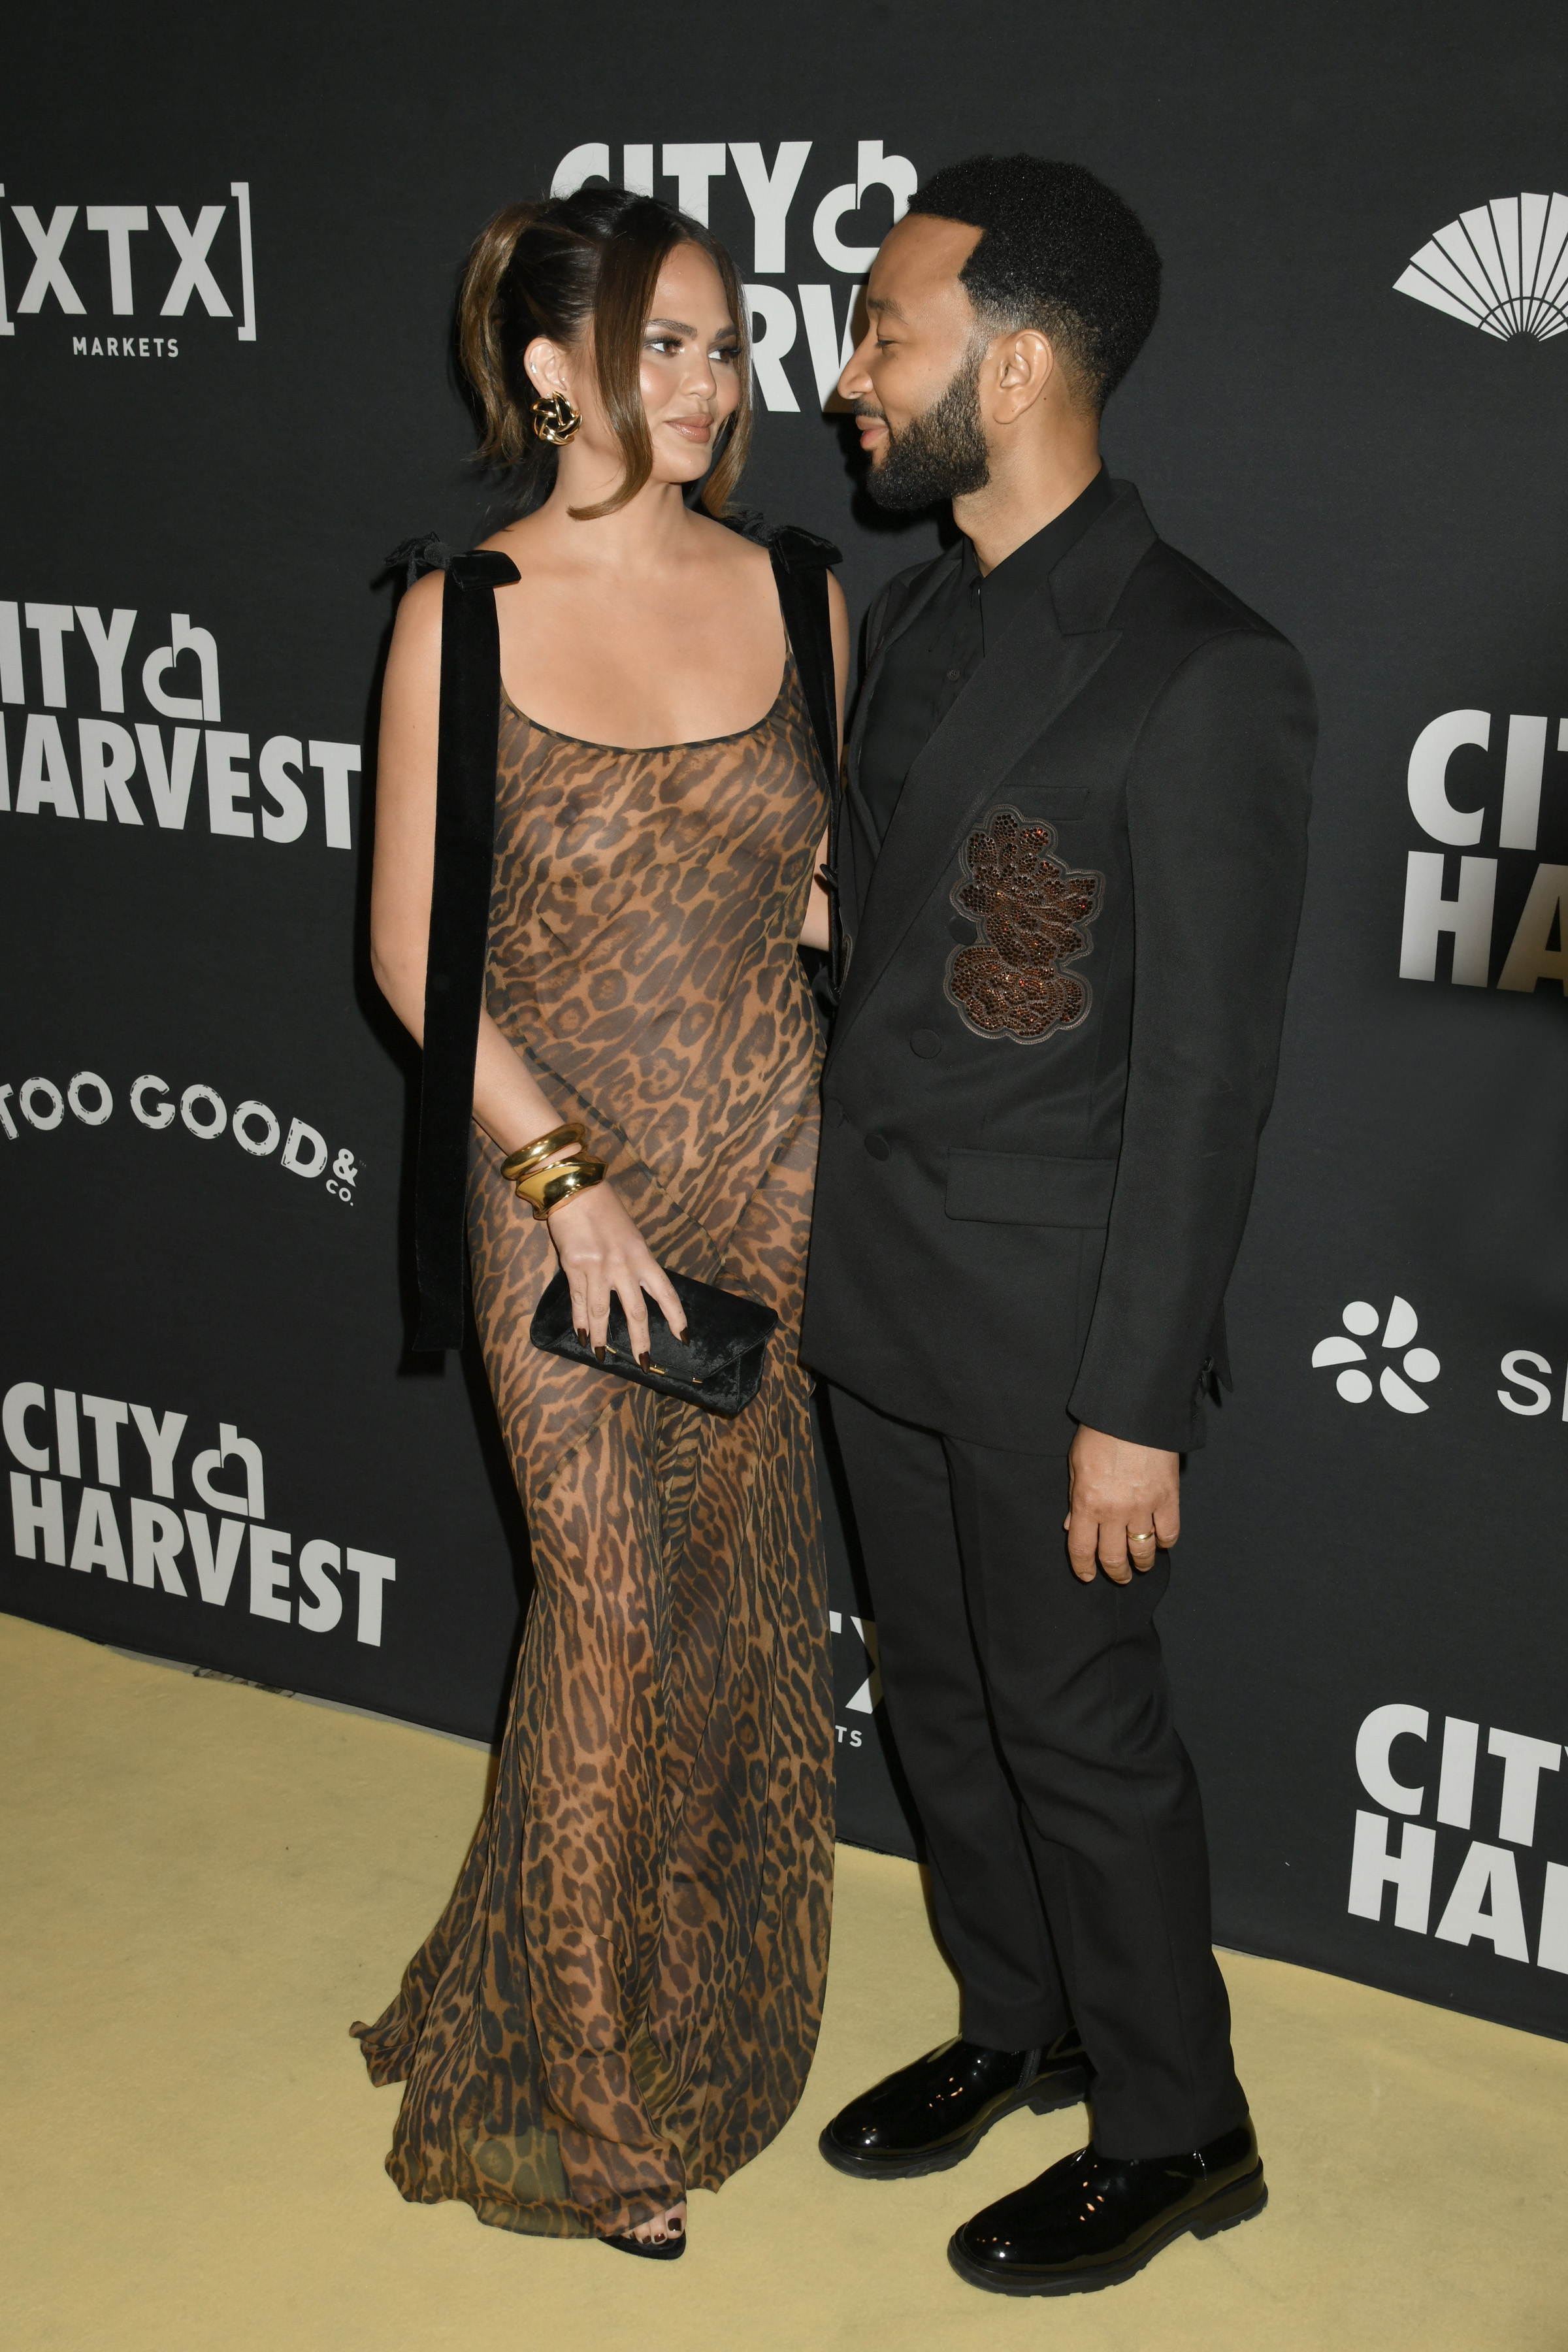 Chrissy pictured with her husband John Legend, who wore an all-black ensemble